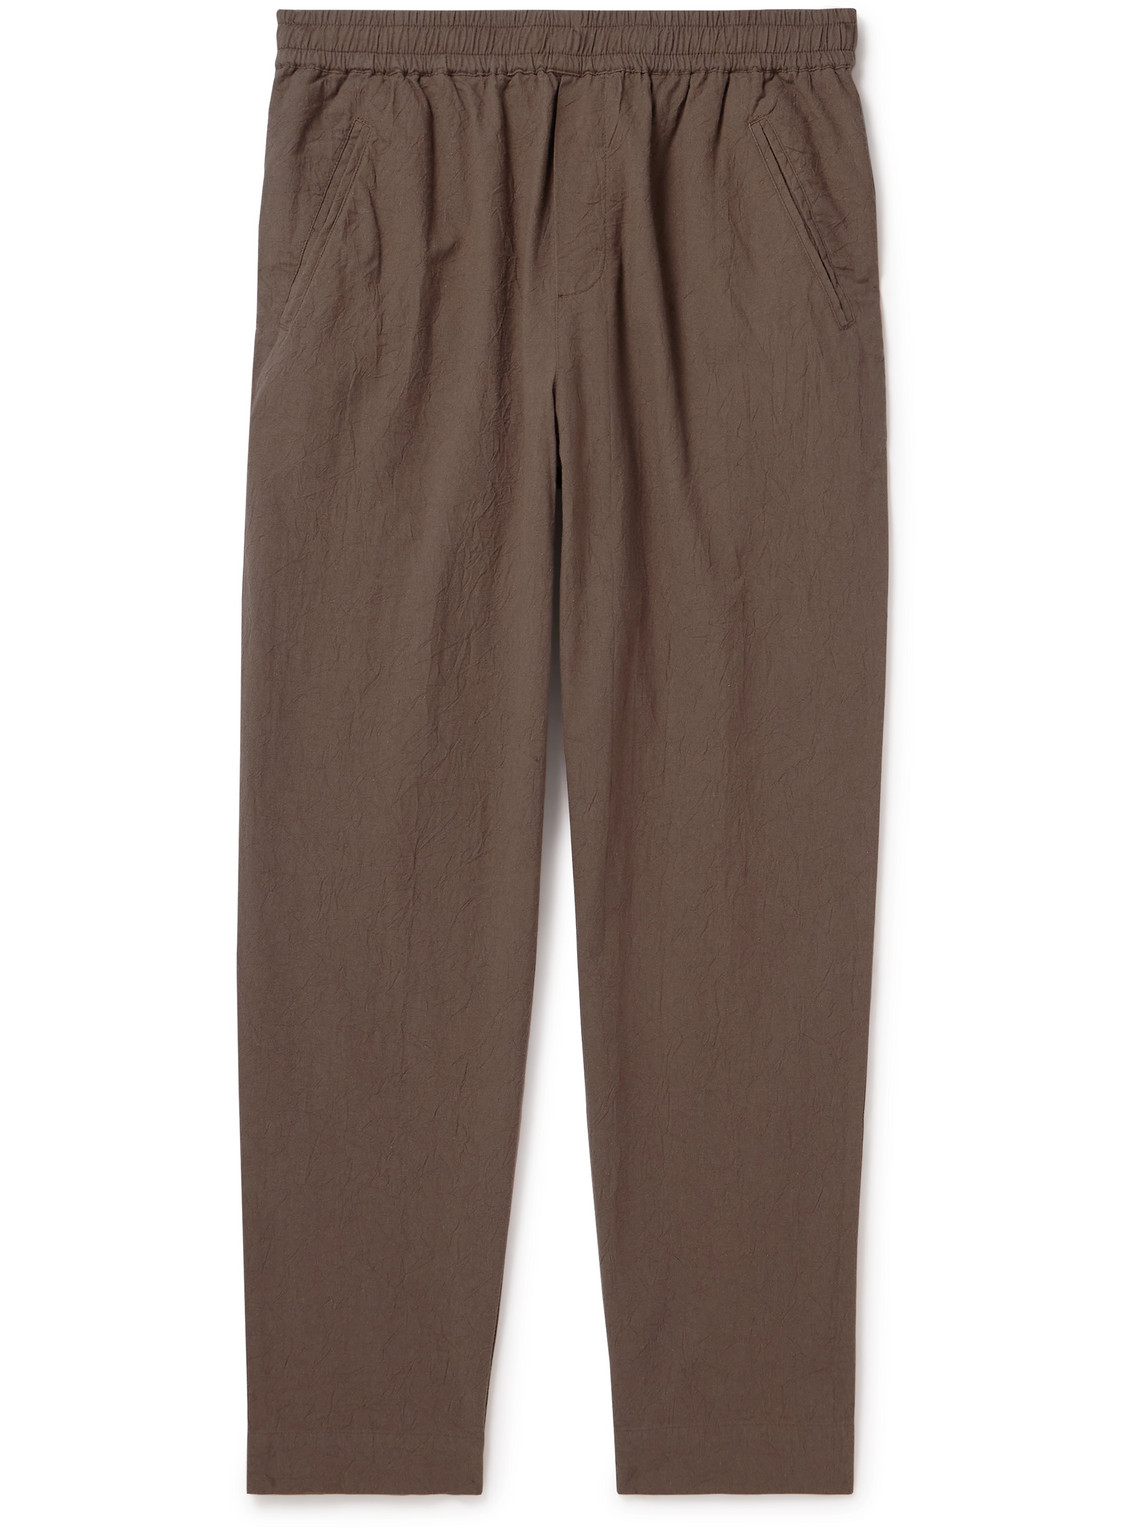 Assembly Tapered Crinkled-Cotton Trousers